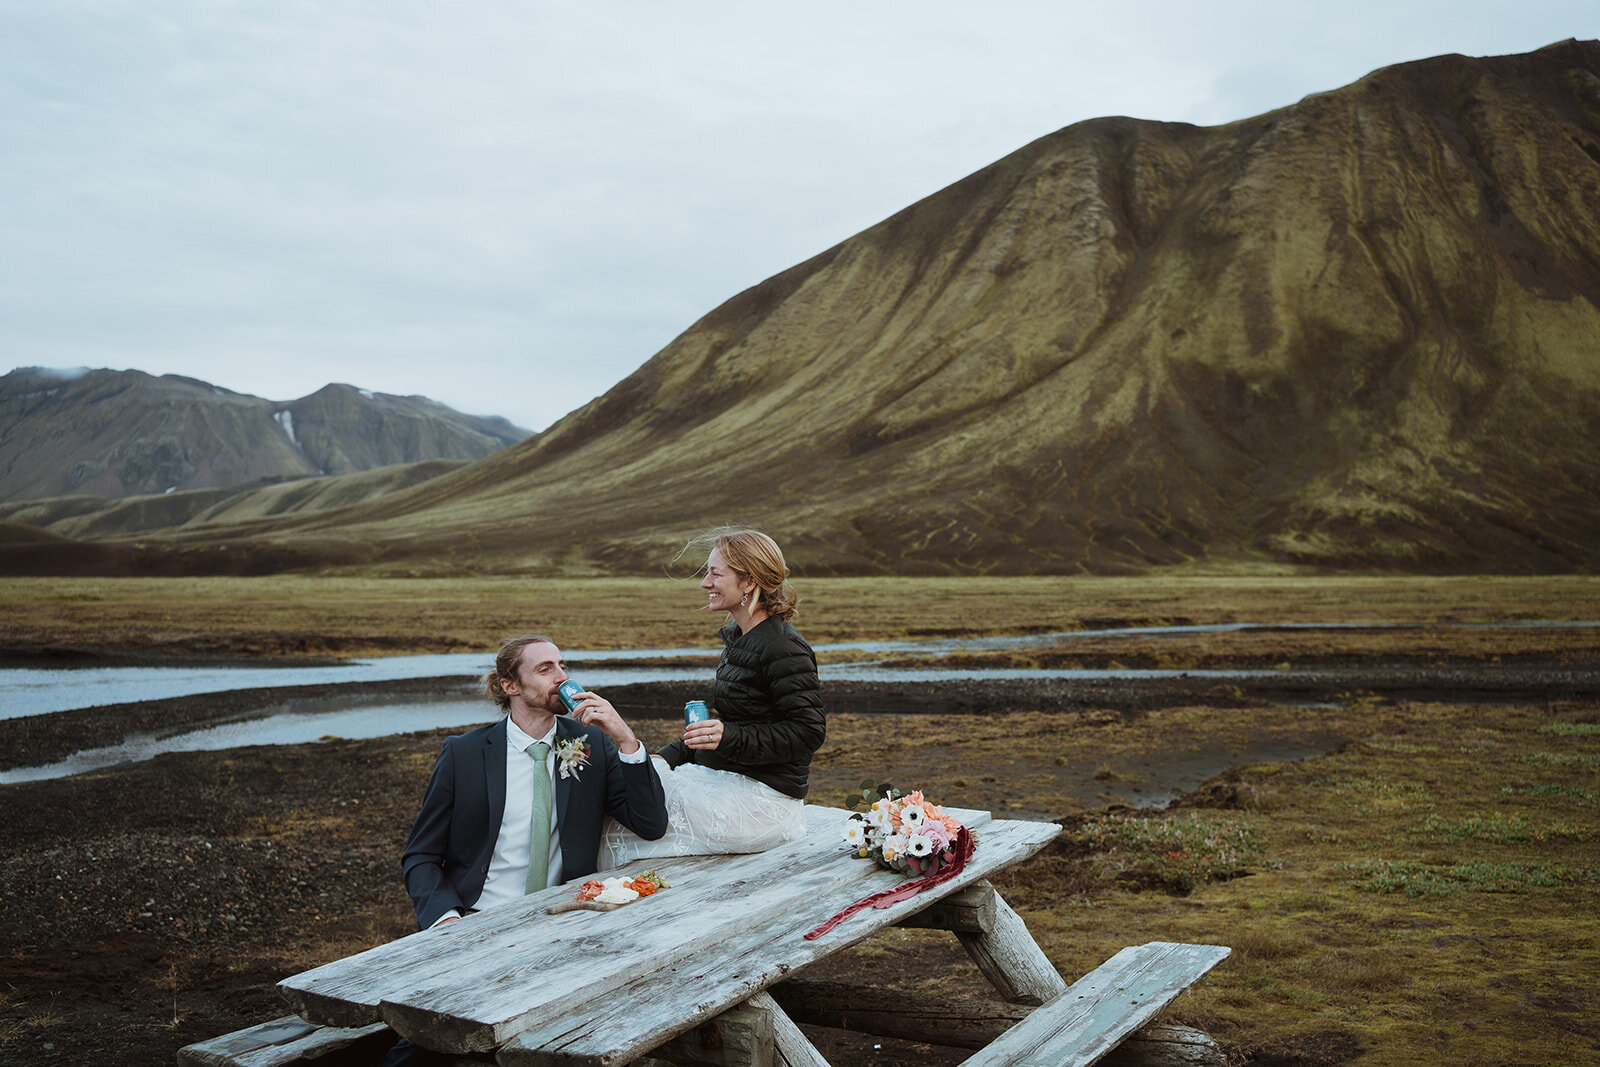 the bride and groom are having a picnic after their iceland elopement. they have craft beers, and have a charcuterie board. the bride is sitting on the picnic bench, and the groom is sitting next to her. she is looking out at the scenery and the groom is sipping his drink.